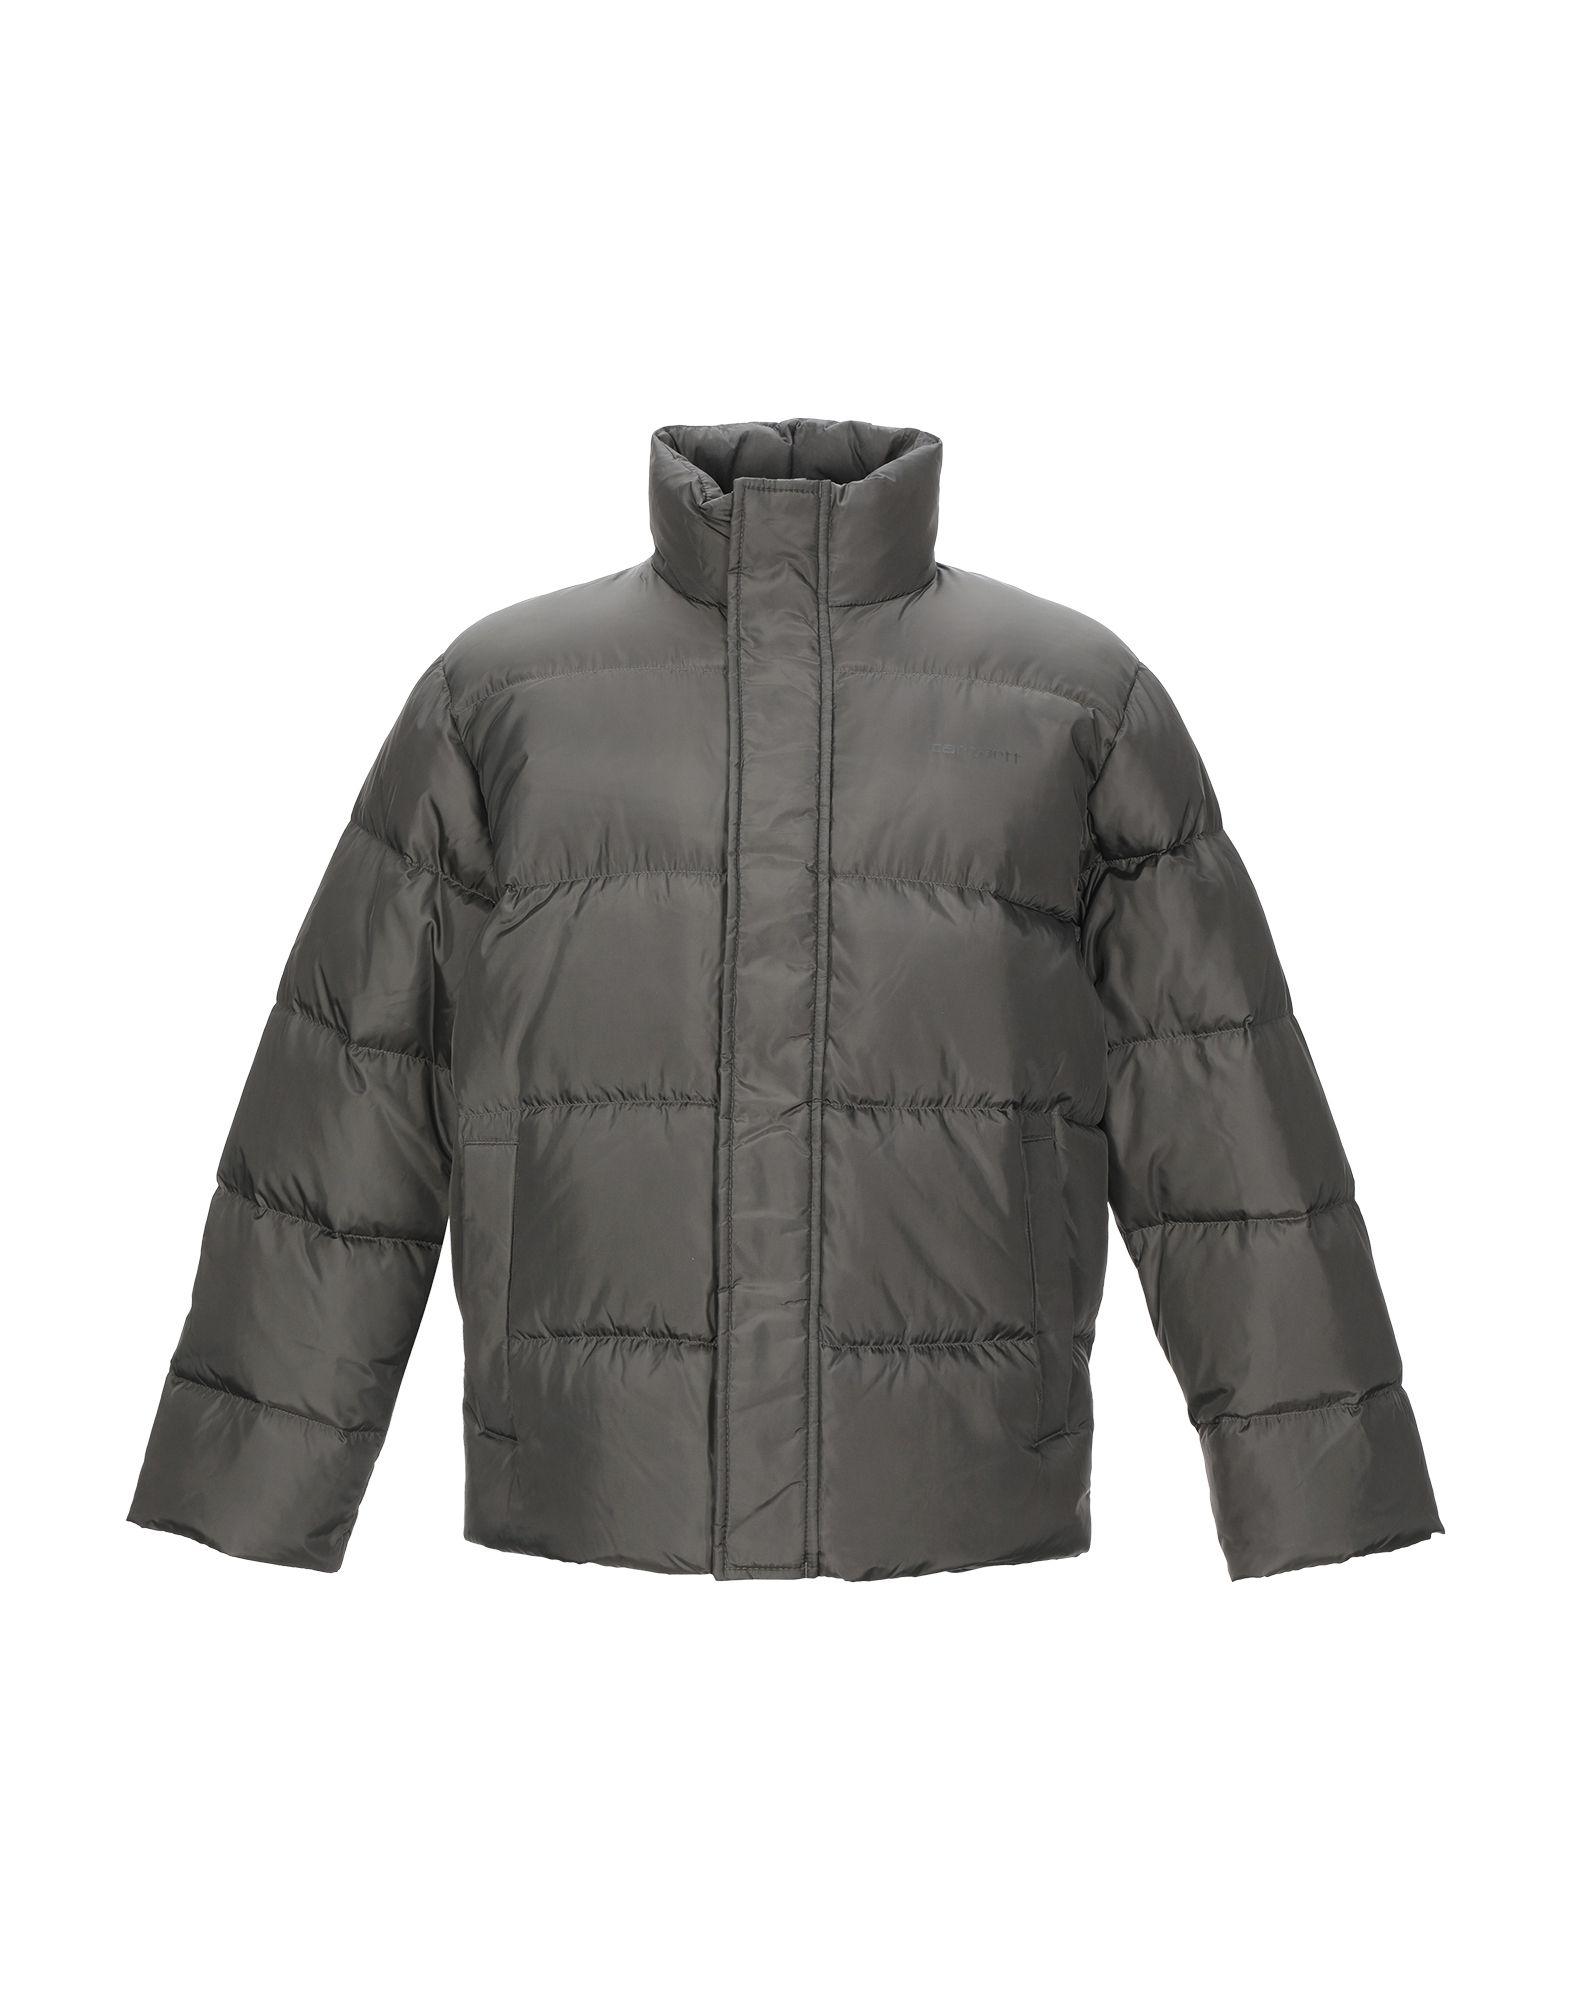 Carhartt Goose Down Jacket in Military Green (Gray) for Men - Lyst